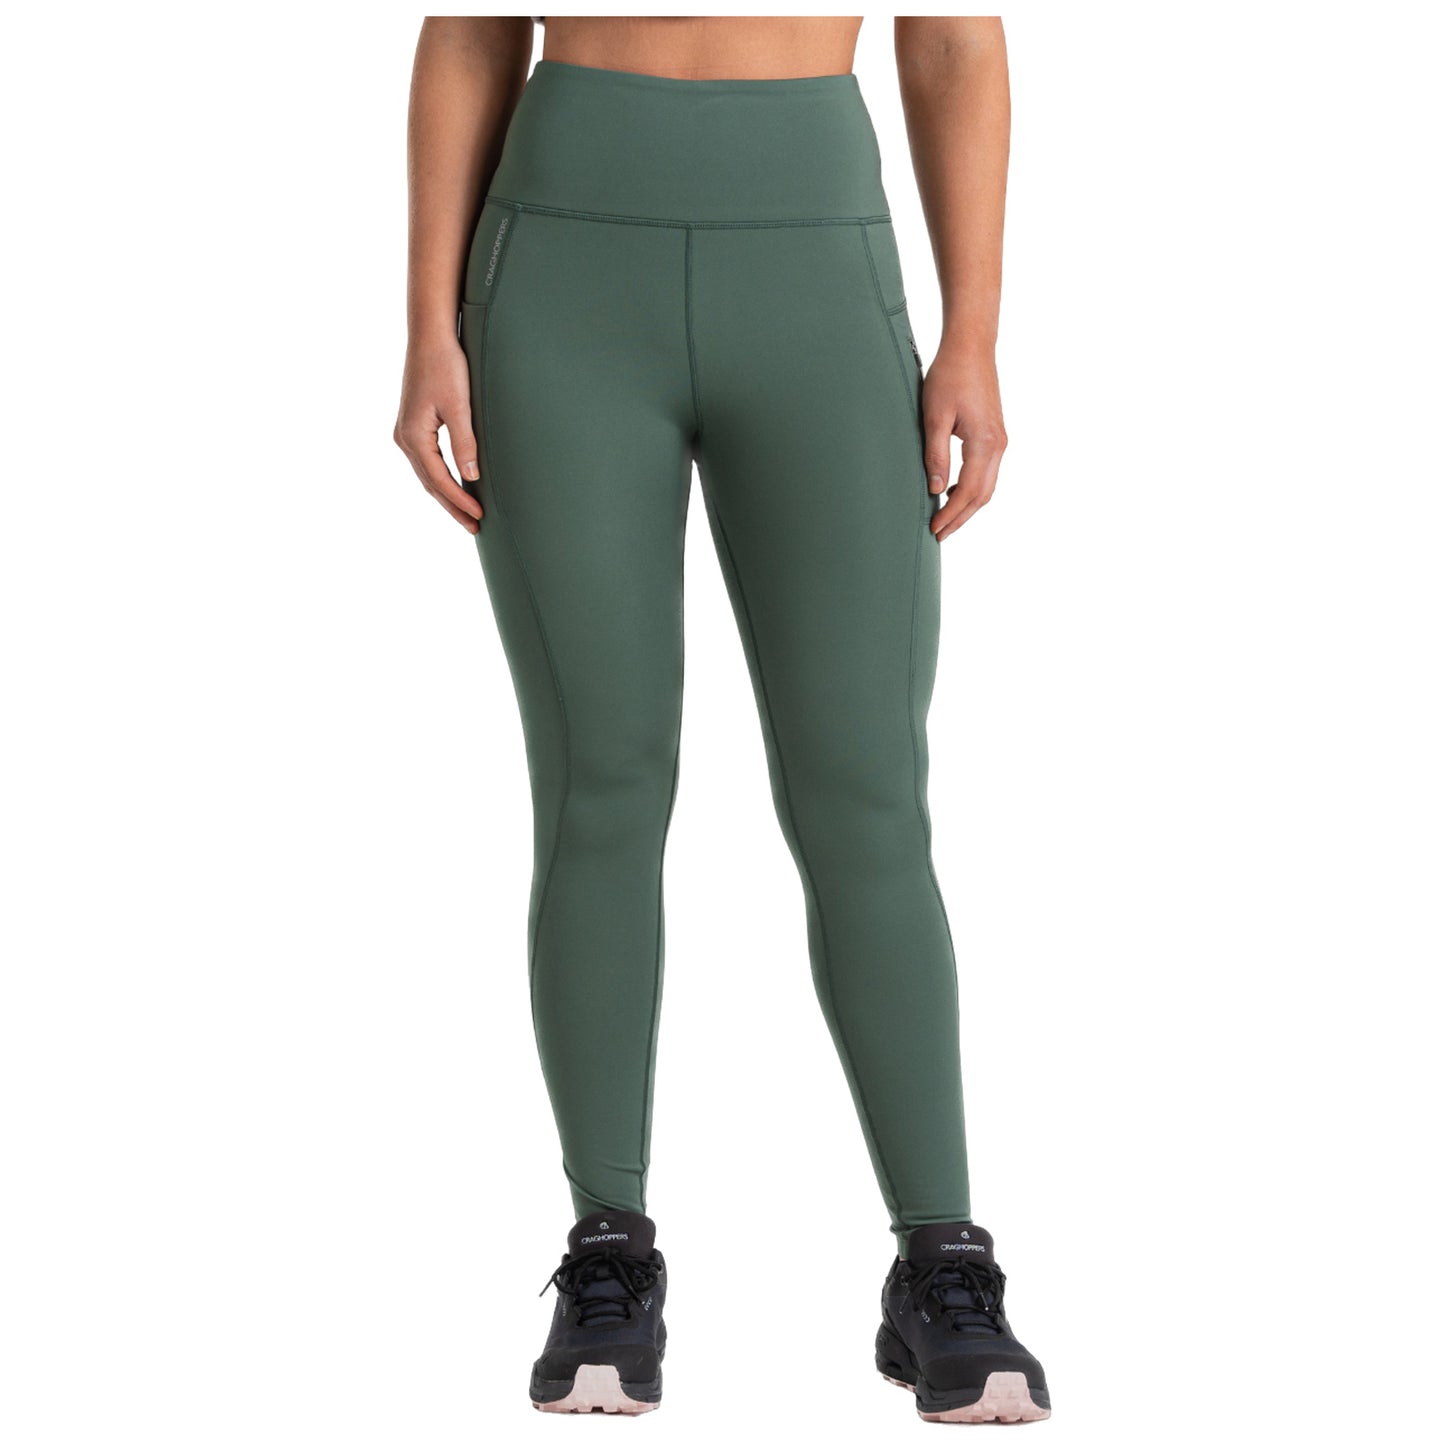 Craghoppers Ladies Compression Thermal Legging CWJ1334